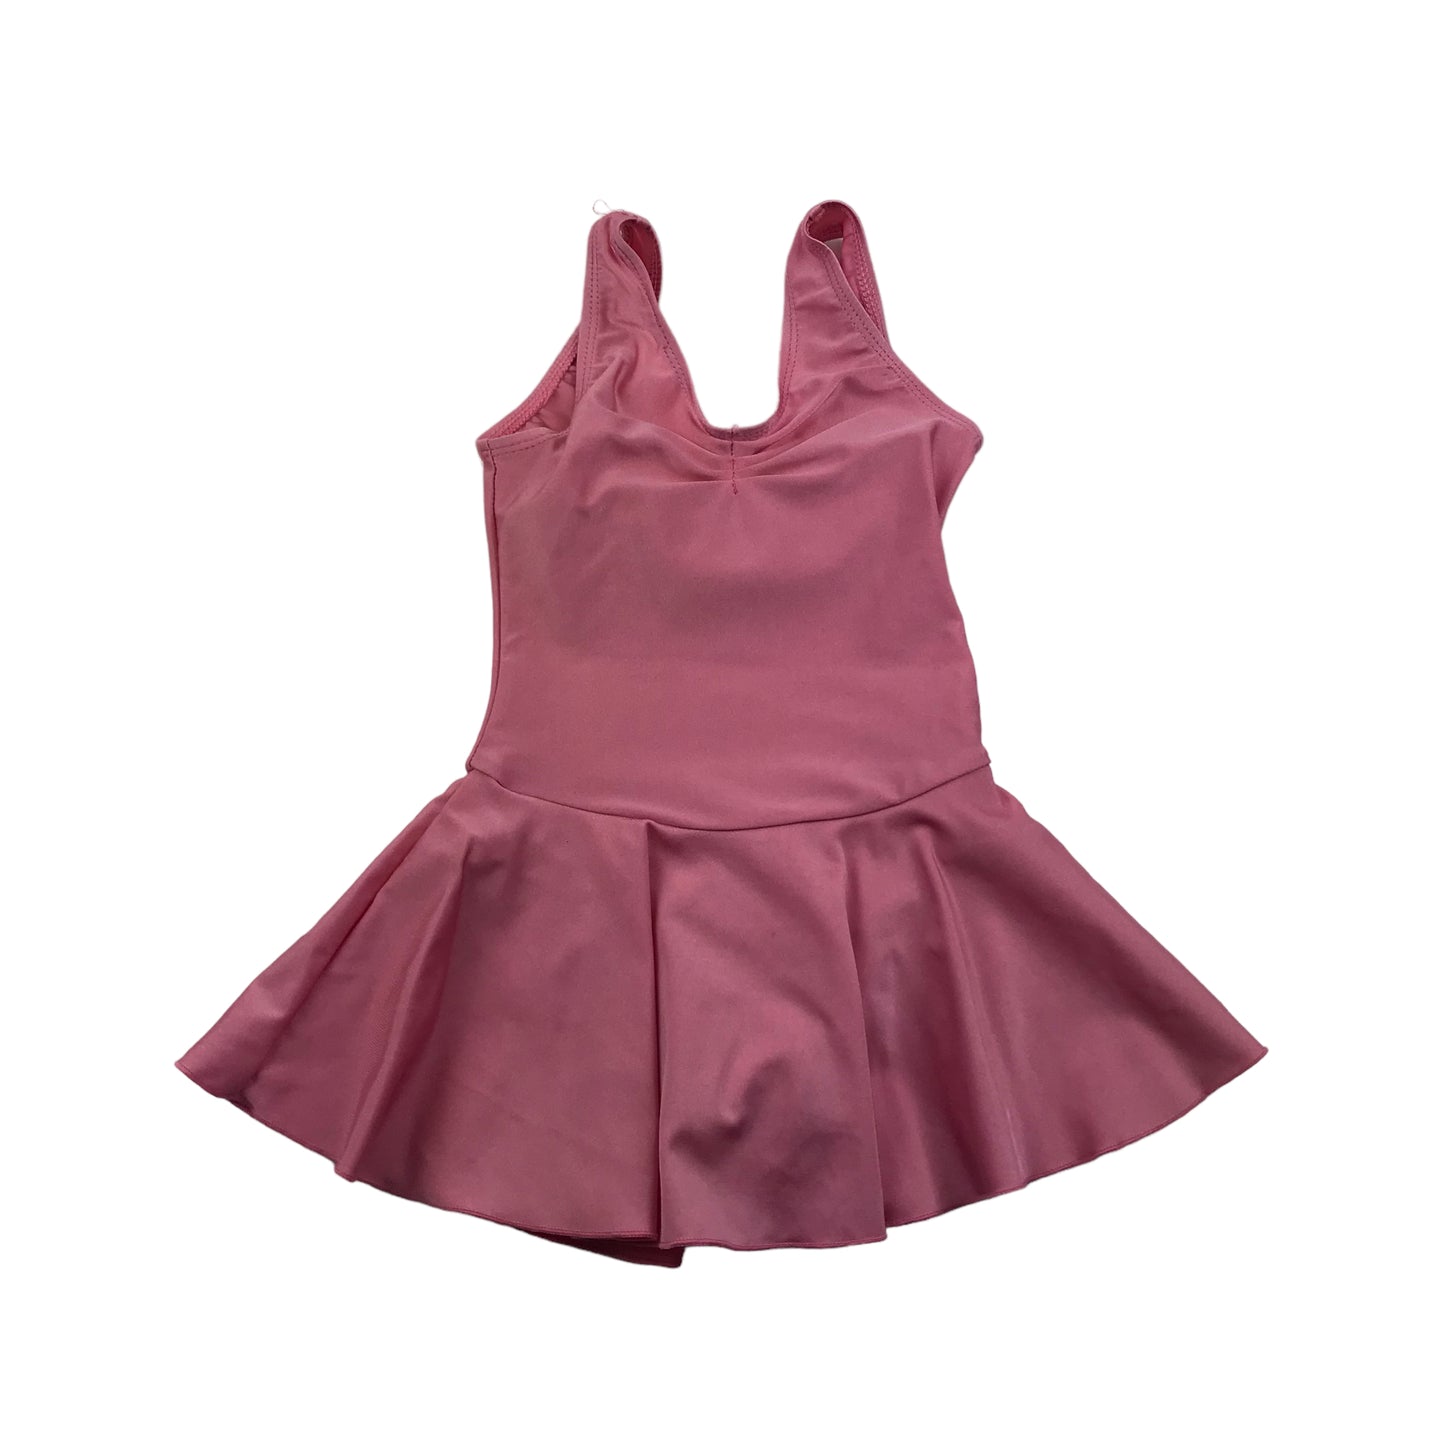 Dancing Daisy Pink Sleeveless Leotard with Skirt Age 4-6